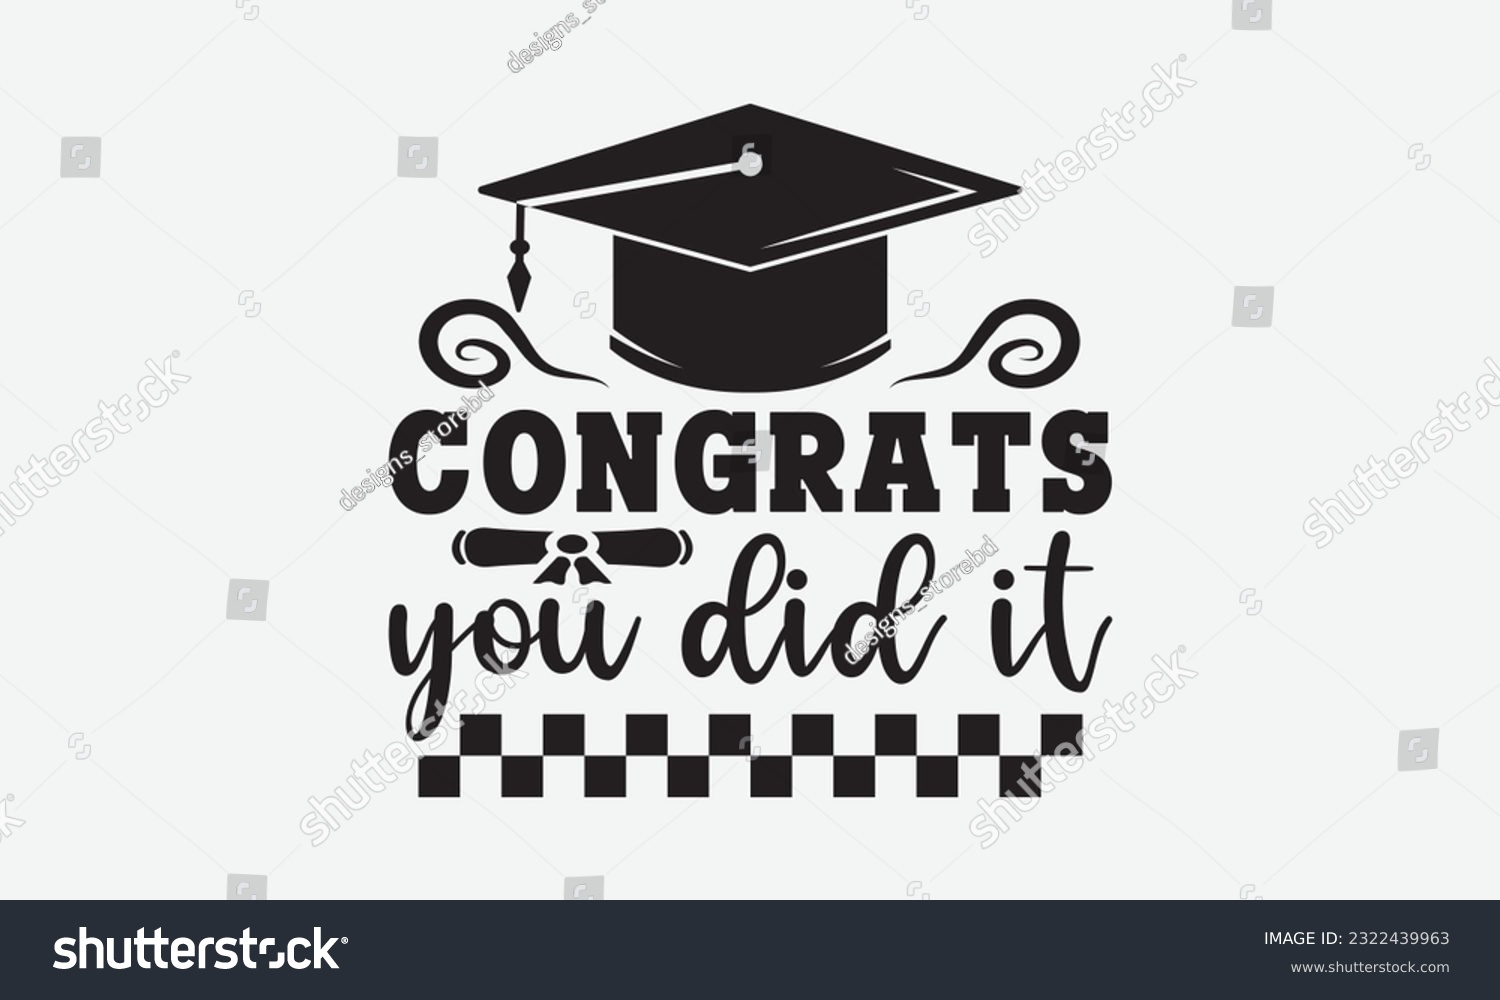 SVG of Congrats you did it svg, Graduation SVG , Class of 2023 Graduation SVG Bundle, Graduation cap svg, T shirt Calligraphy phrase for Christmas, Hand drawn lettering for Xmas greetings cards, invitations svg